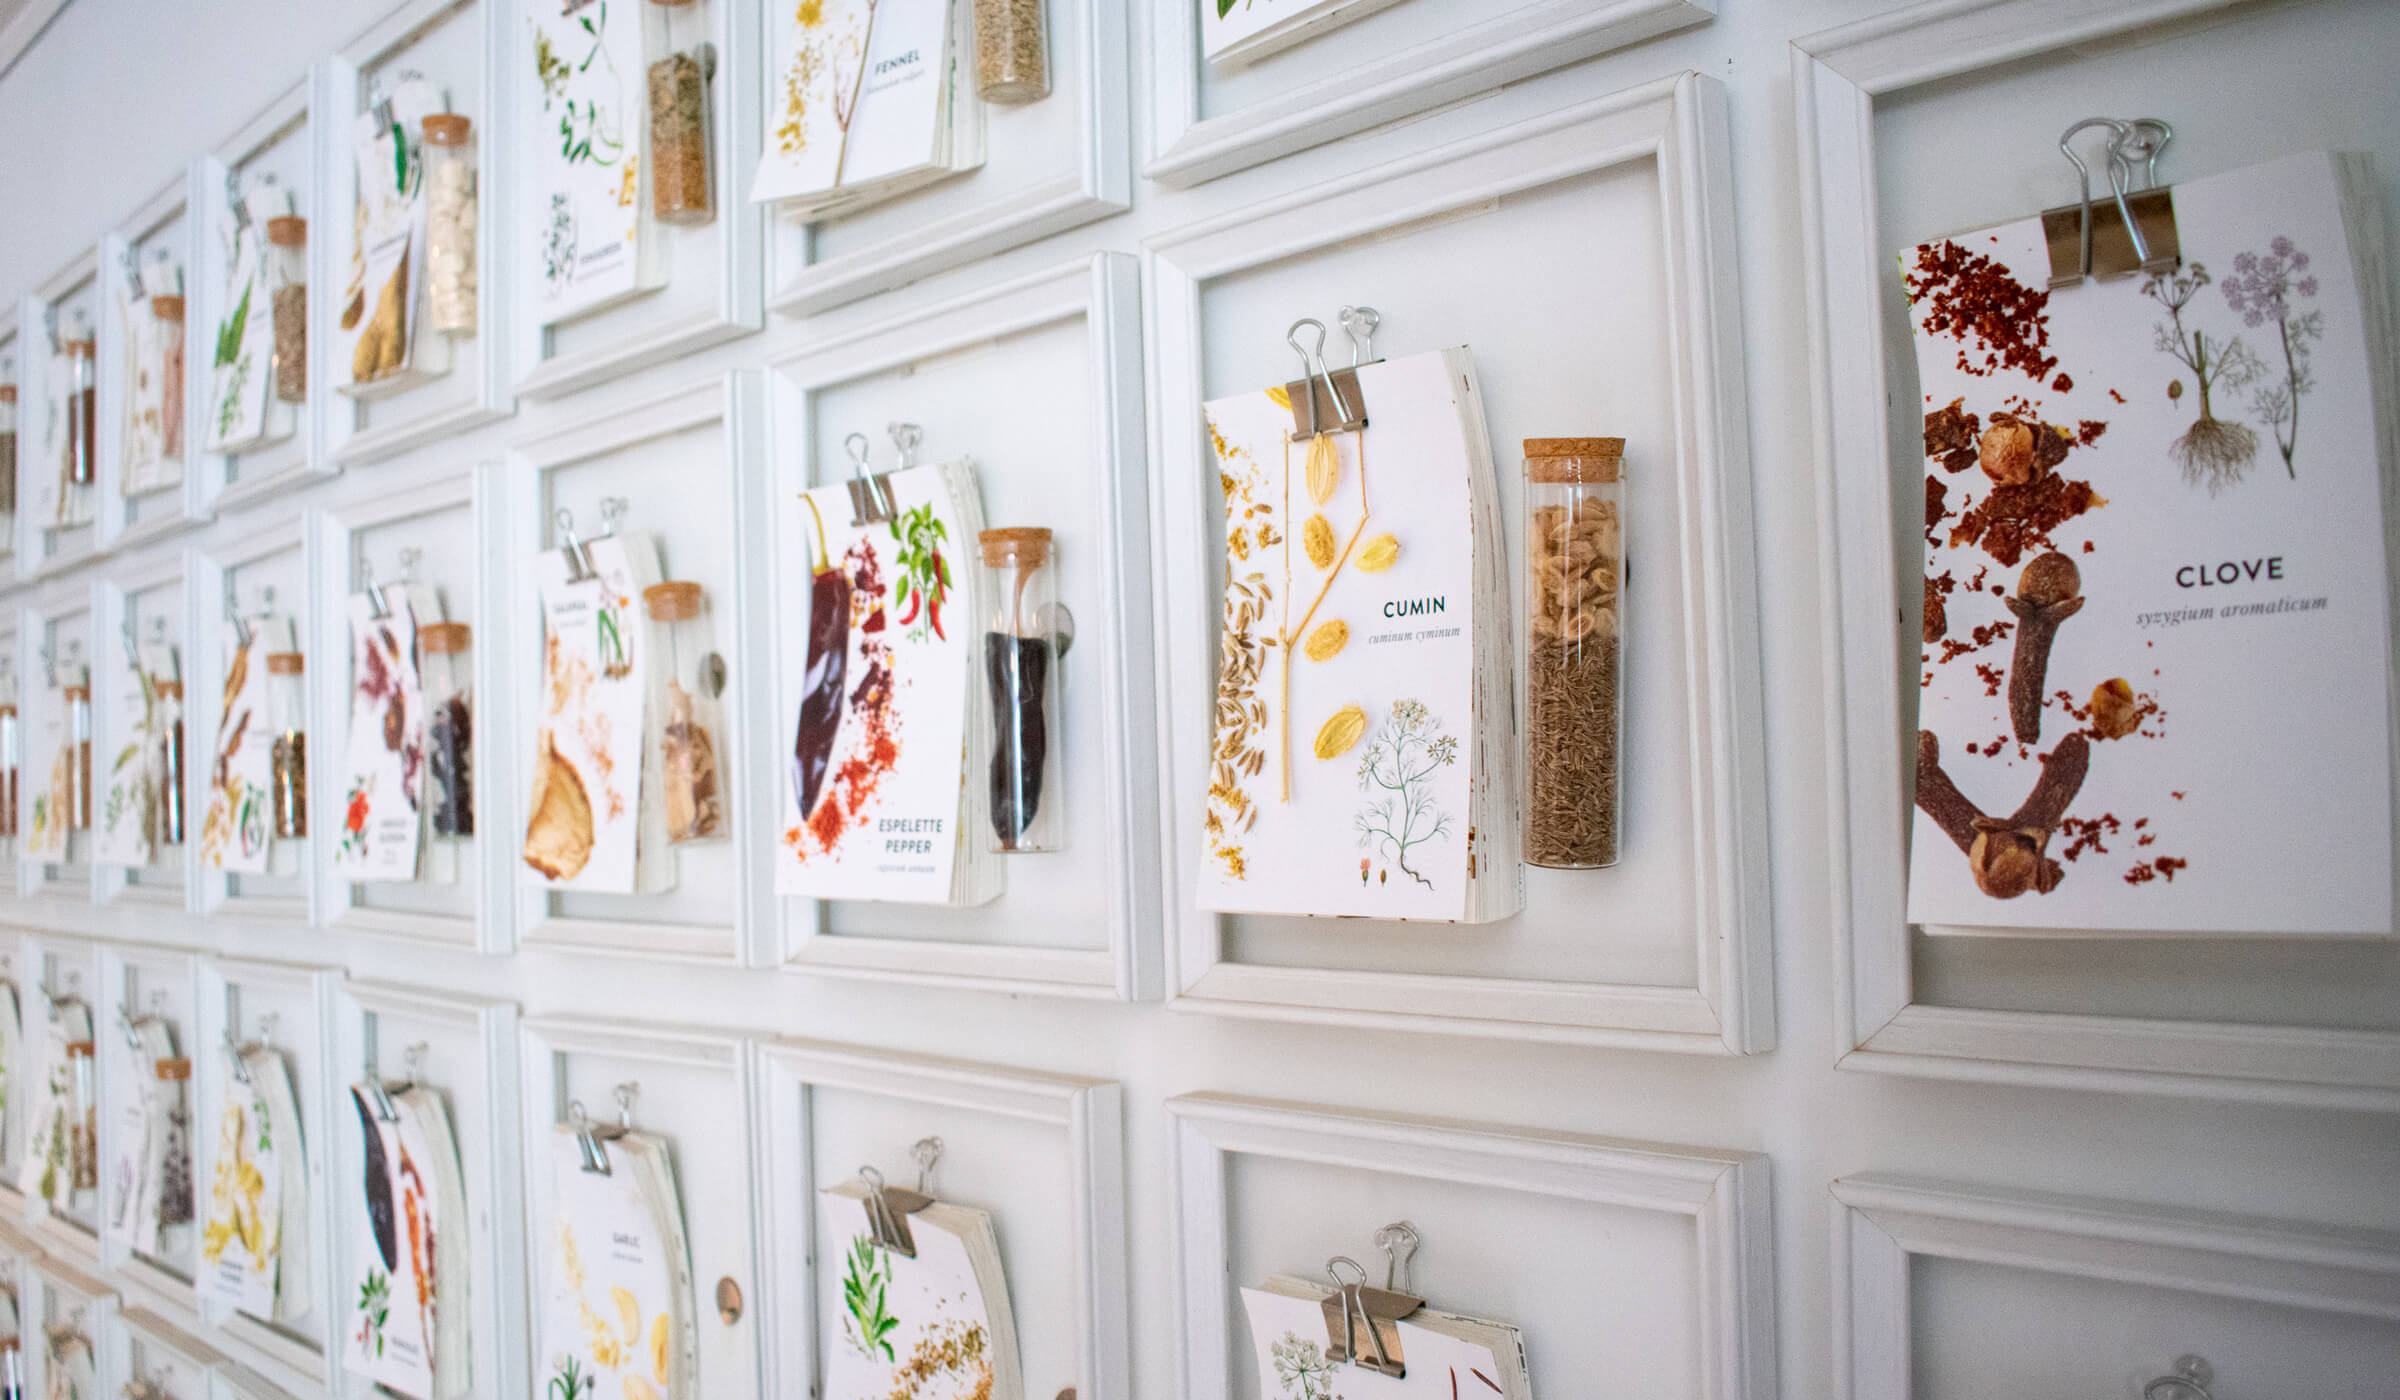 Wall of hand outs about spices at La Boite in New York City